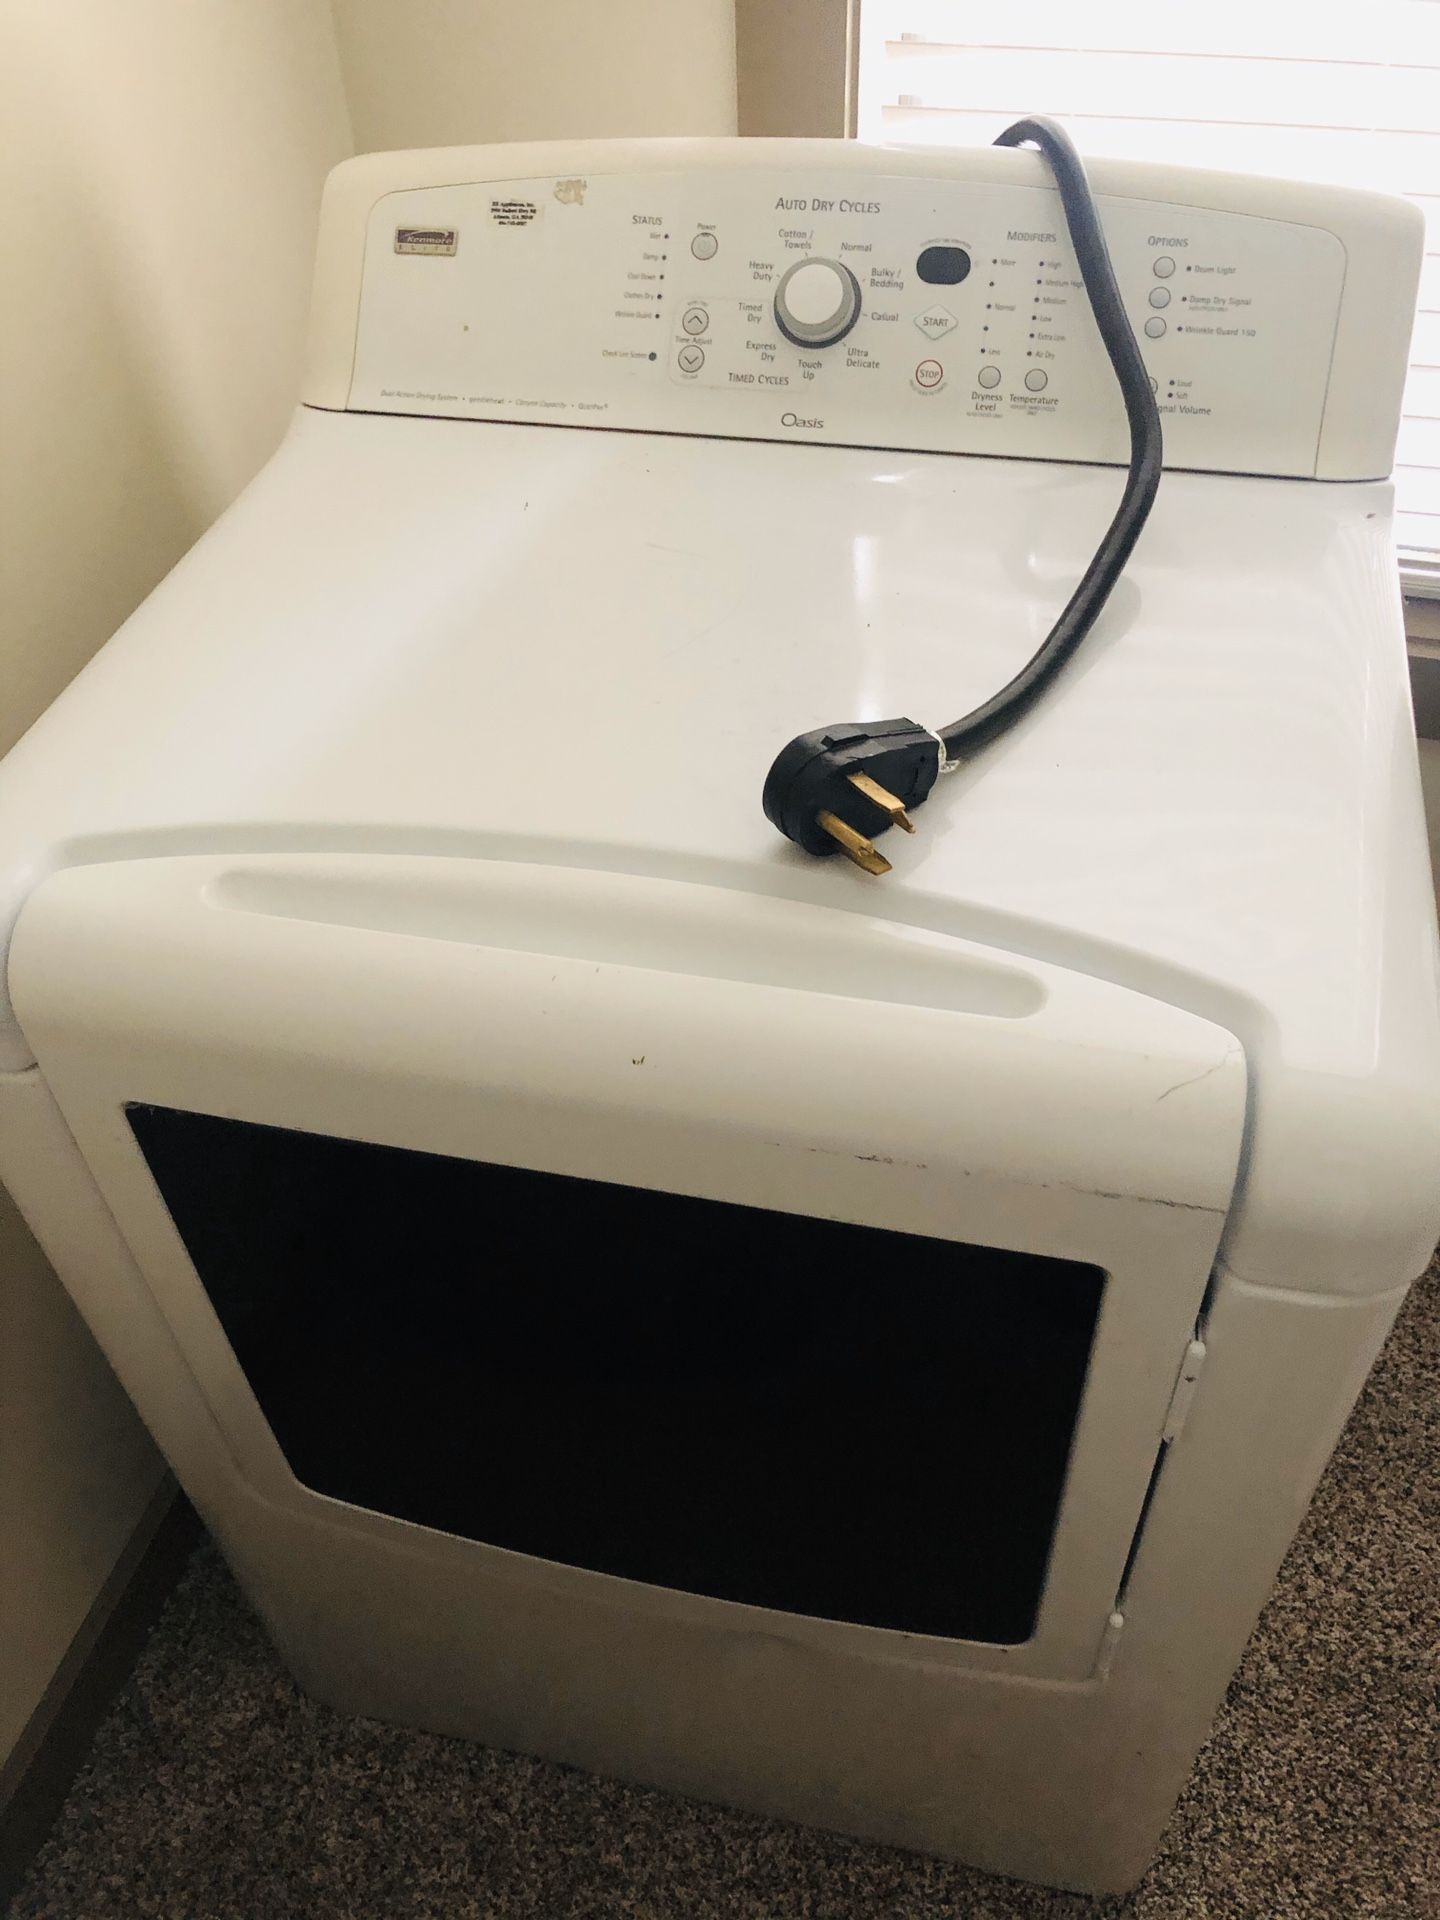 (PICK UP ONLY) WASHER AND DRYER x KENMORE ELITE x HOSES ALL INCLUDED